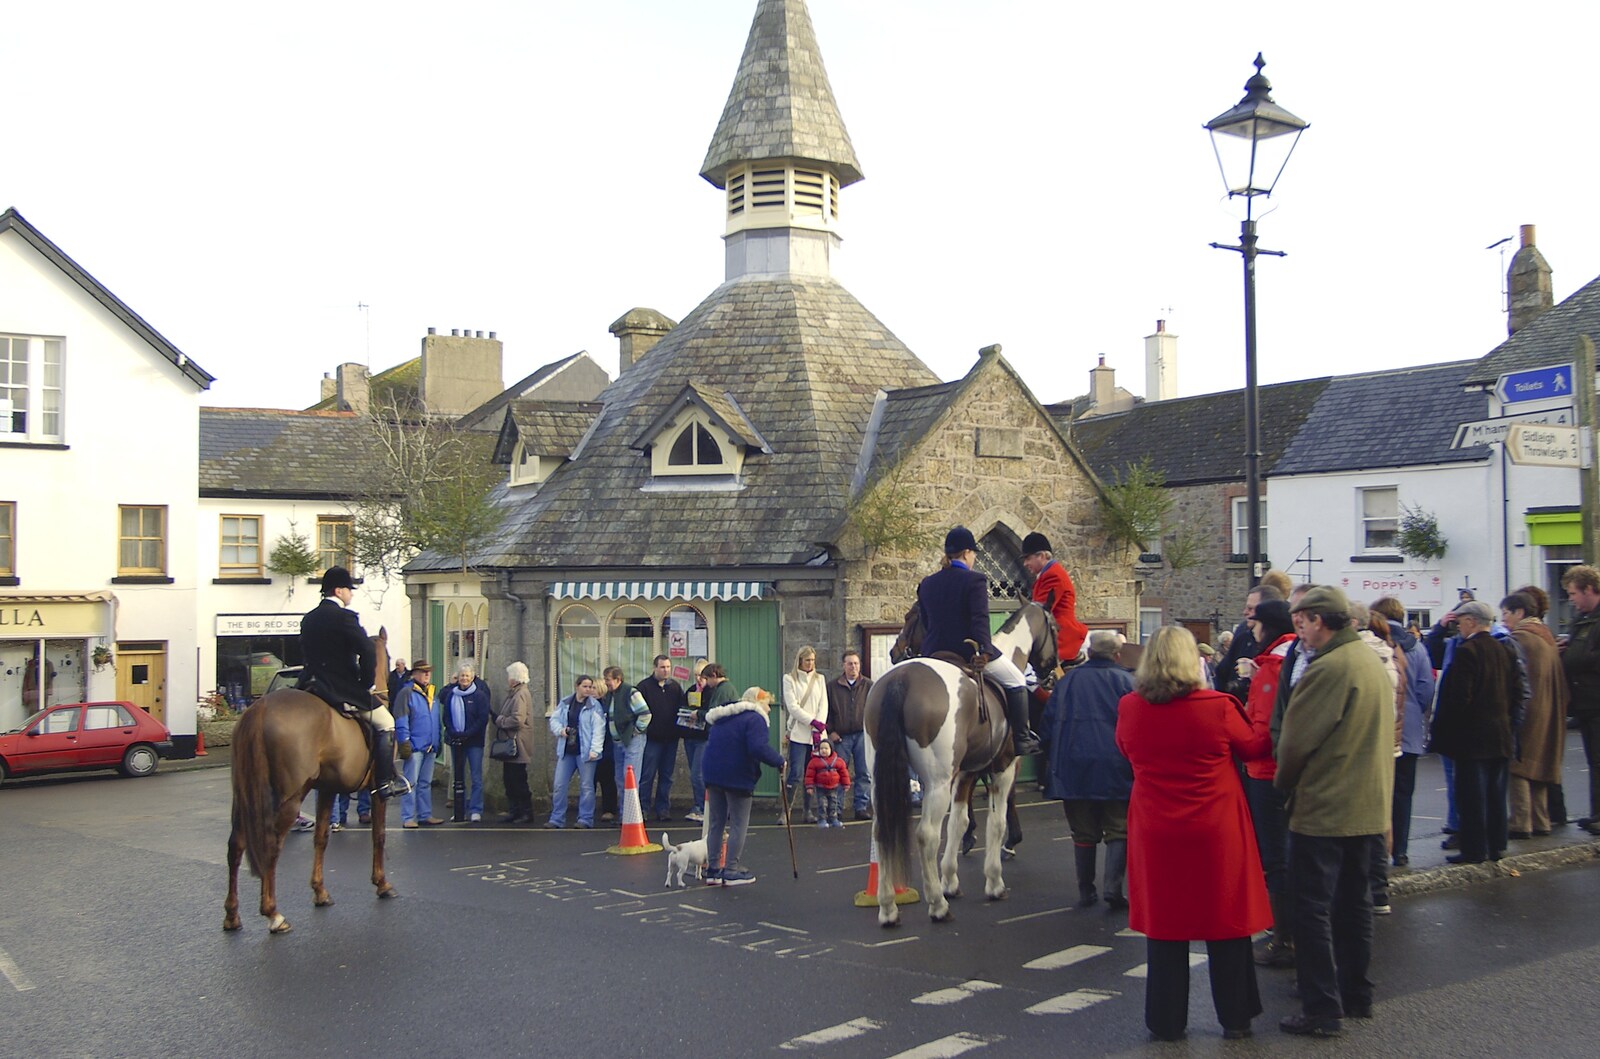 The hunt starts gathering in The Square from A Boxing Day Hunt, Chagford, Devon - 26th December 2007